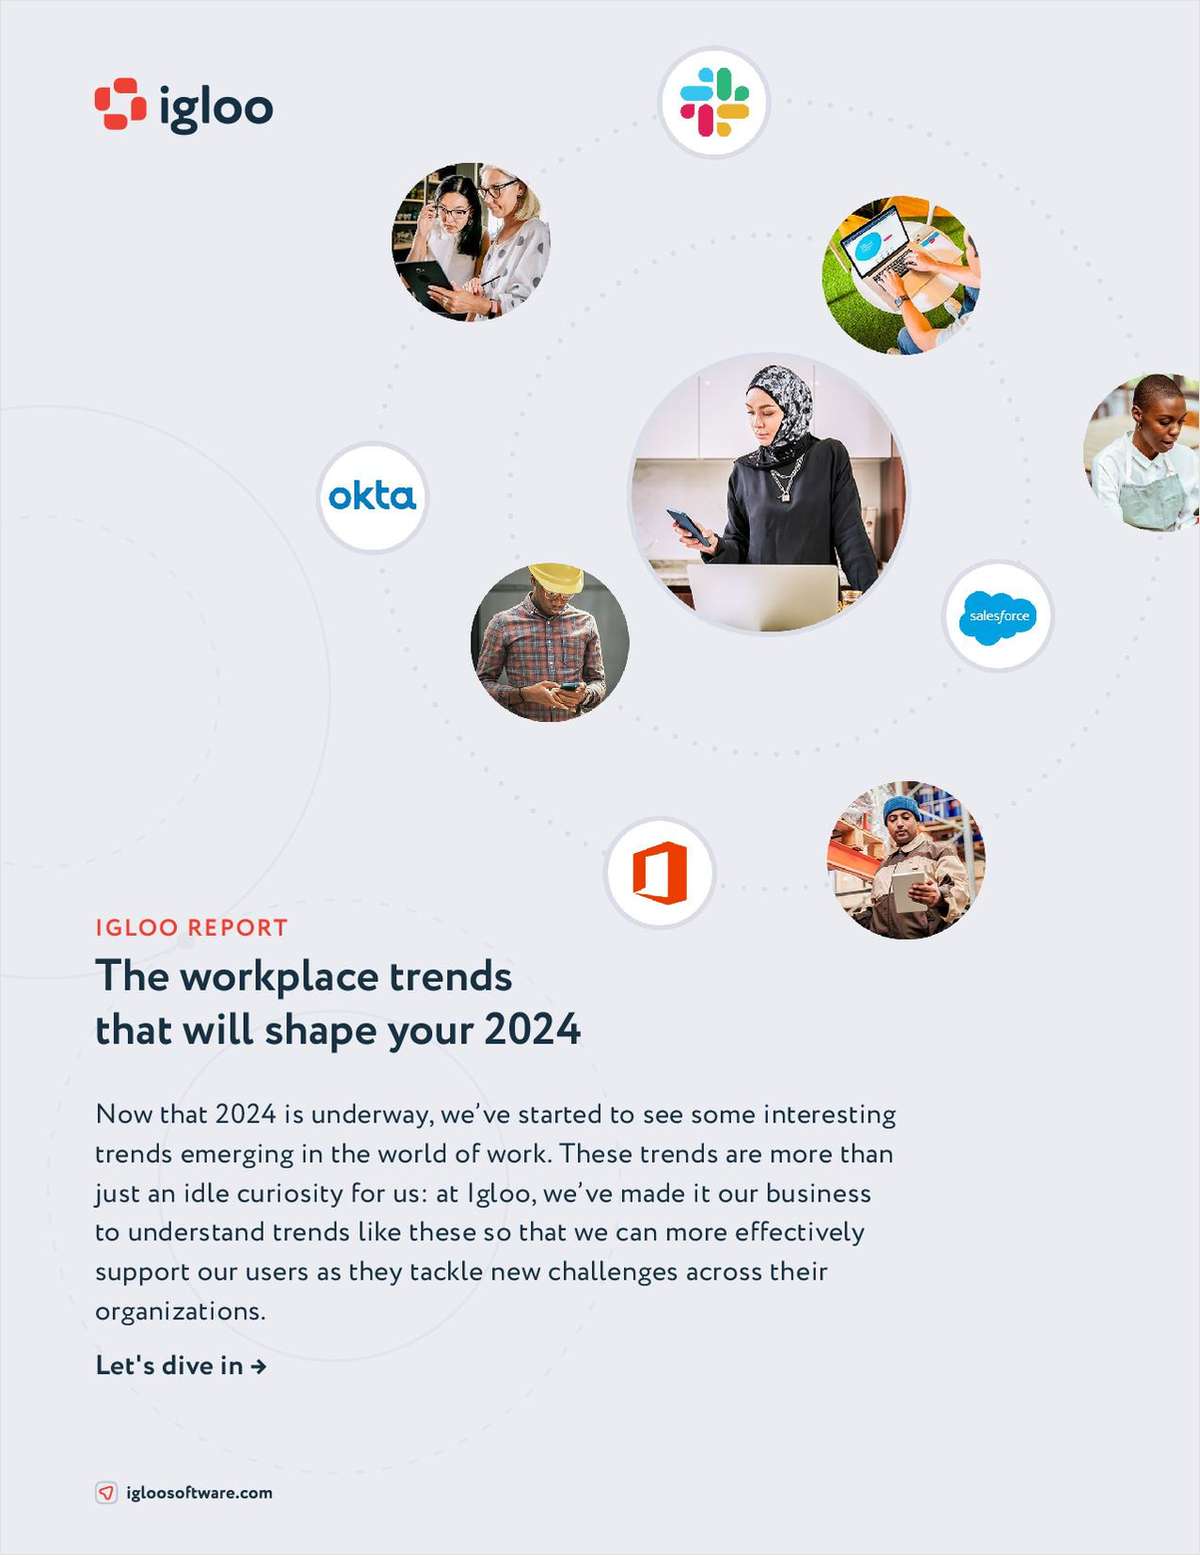 The workplace trends that will shape your 2024